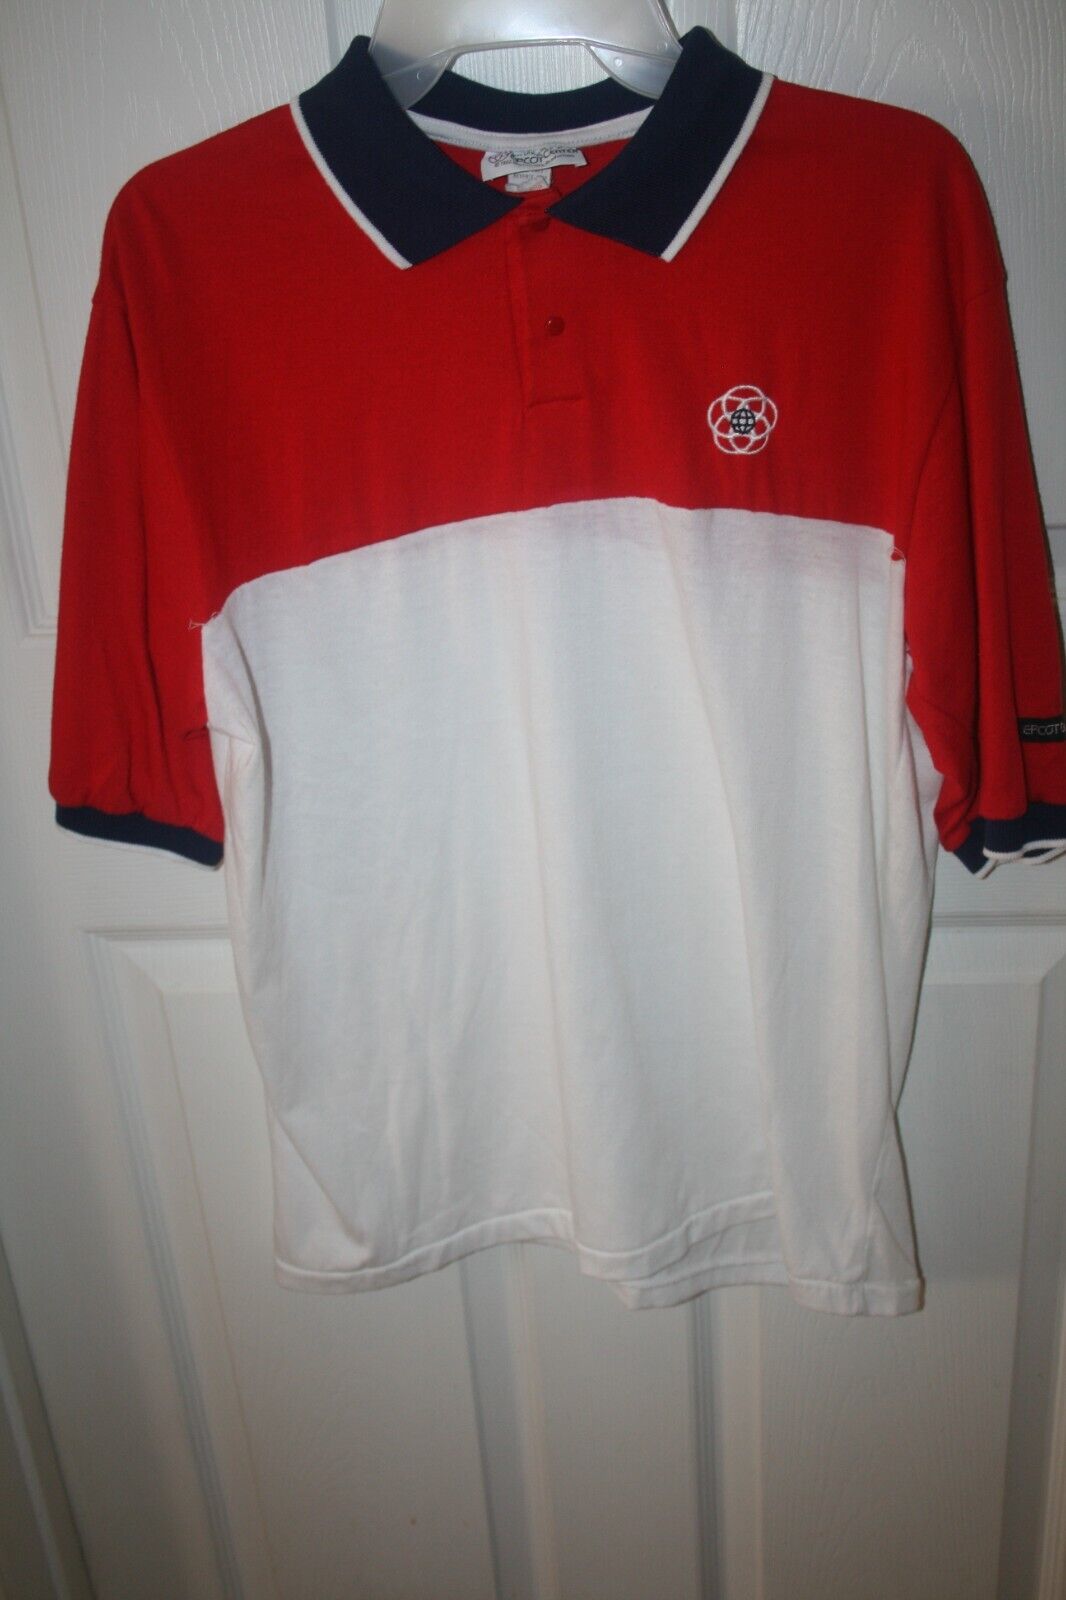 Vintage 1982 Epcot Opening Large Red, White and Blue Golf Shirt